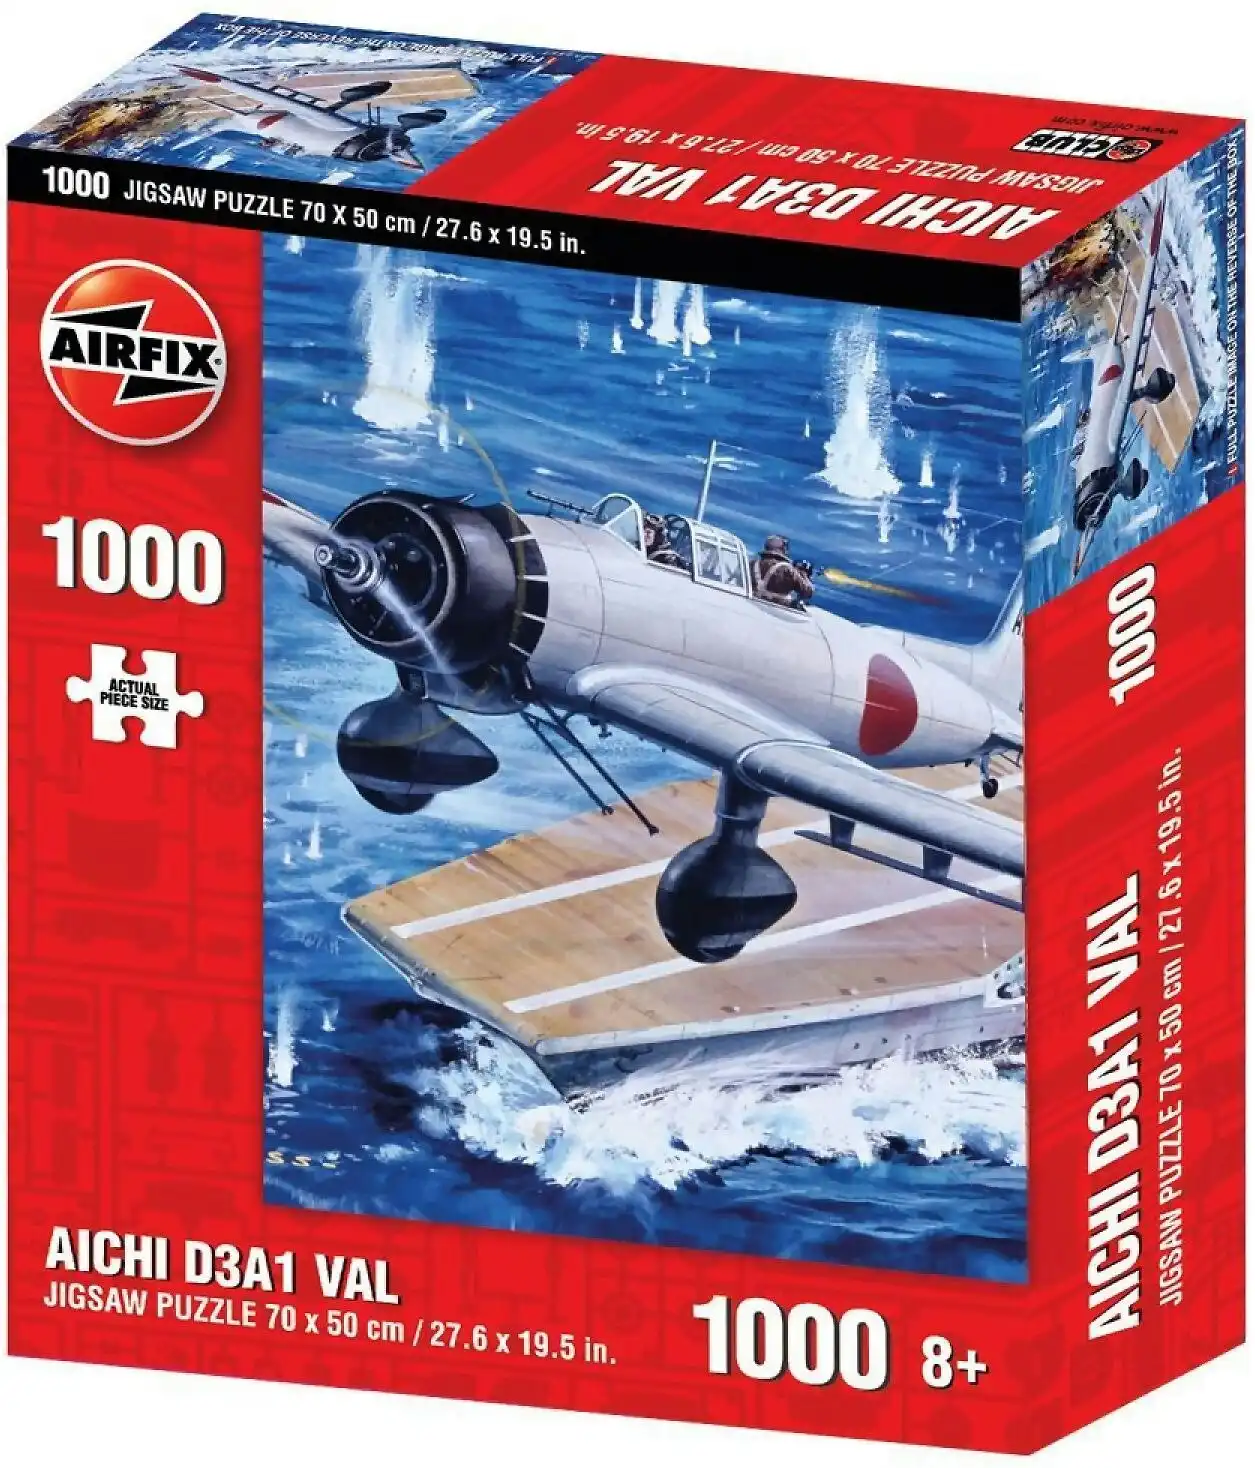 Holdson - Airfix Puzzle Collection - Aichi D3A1 Val Jigsaw Puzzle 1000 Pieces